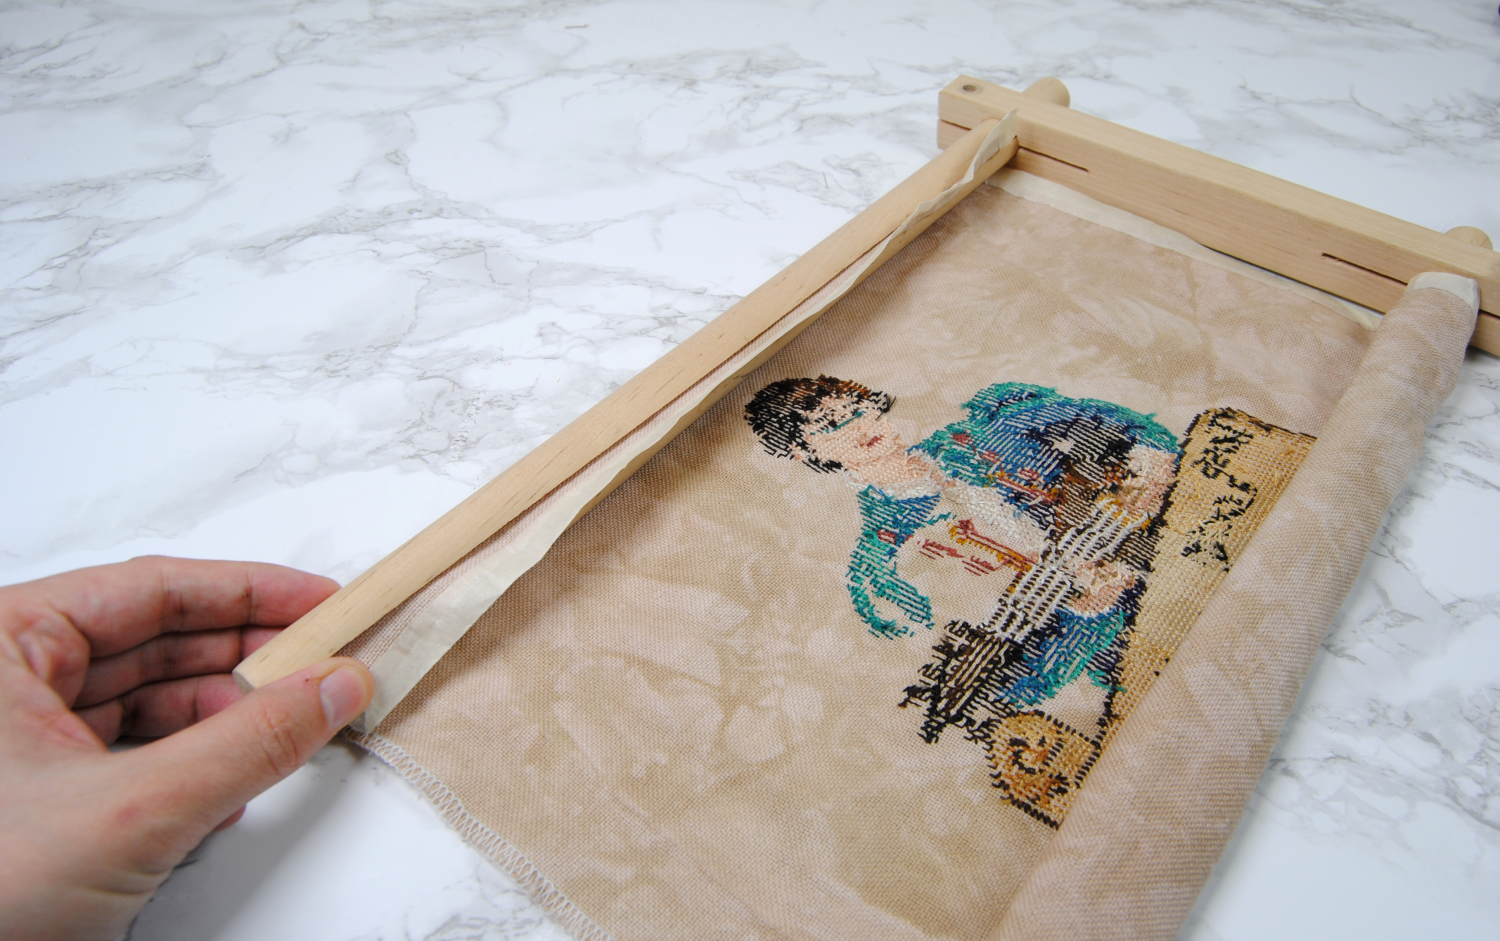 SQUARE Embroidery FRAME. Hand Embroidery Frame. Cross Stitch Frame